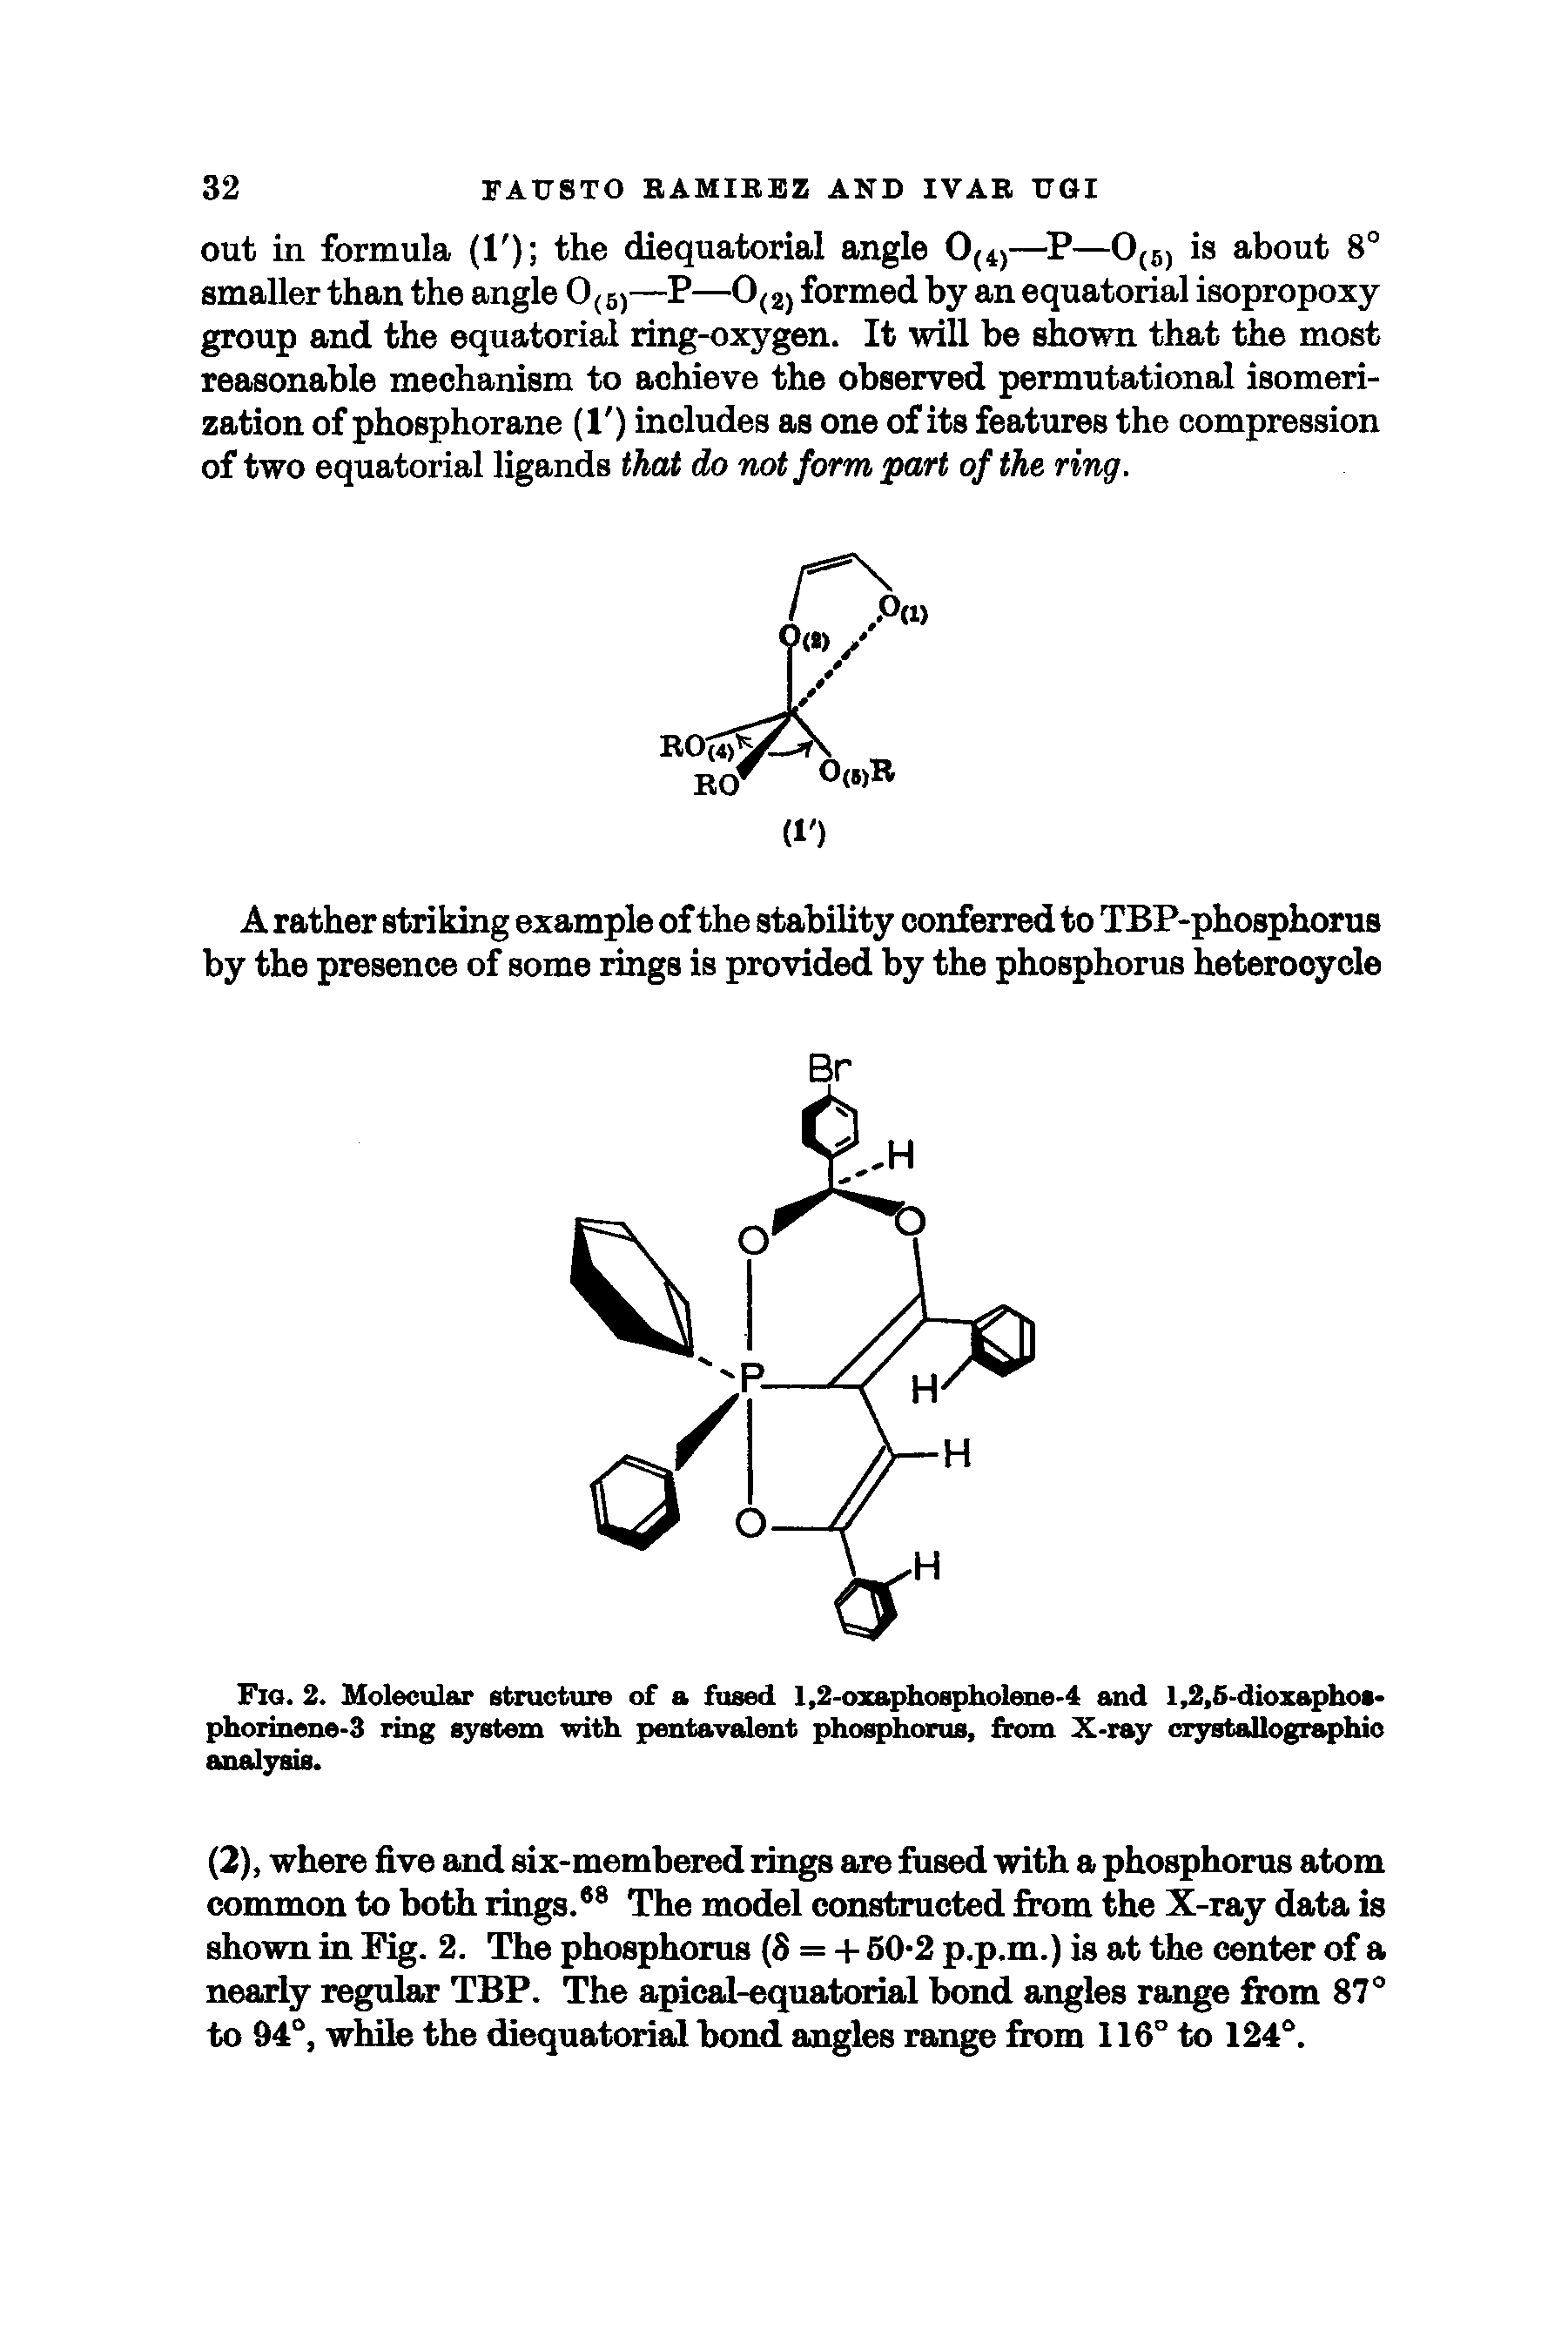 Fig. 2. Molecular structure of a fused 1,2-oxaphospholene-4 and 1,2,5-dioxaphot-phorinene-3 ring system with pentavalent phosphorus, from X-ray crystallographic analysis.